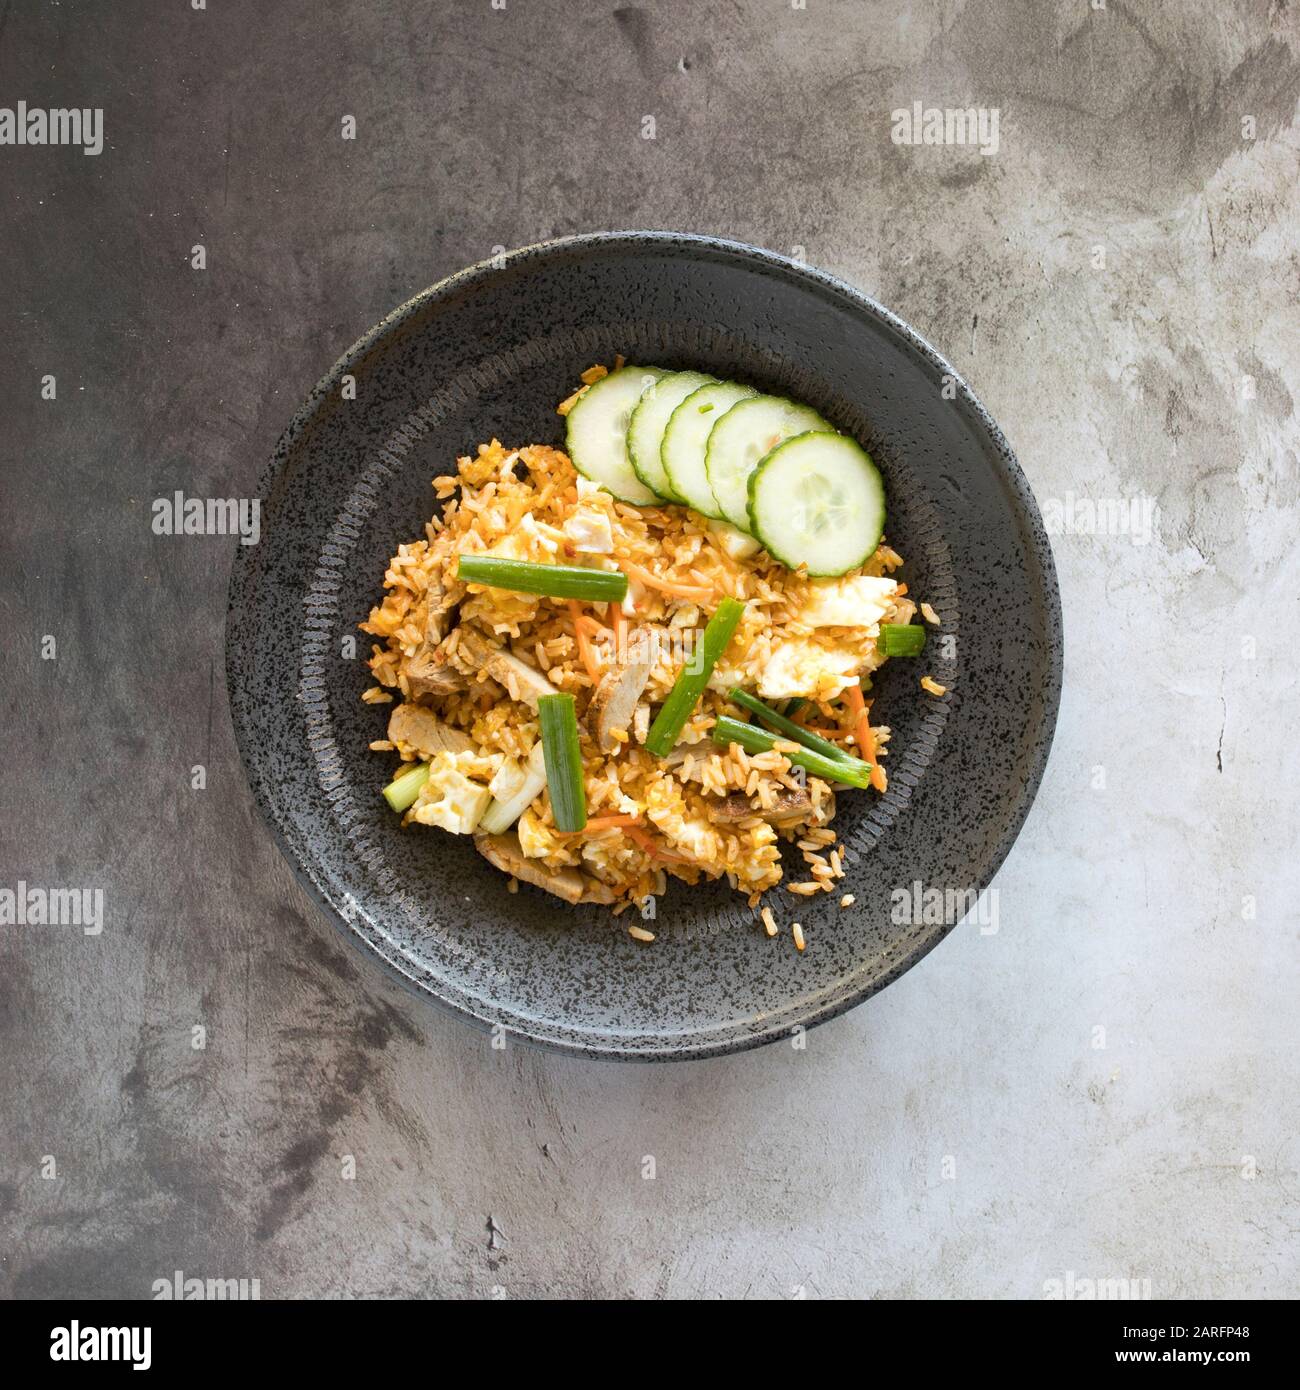 Kimchi Pork Fried Rice with Pickled Vegetables Stock Photo